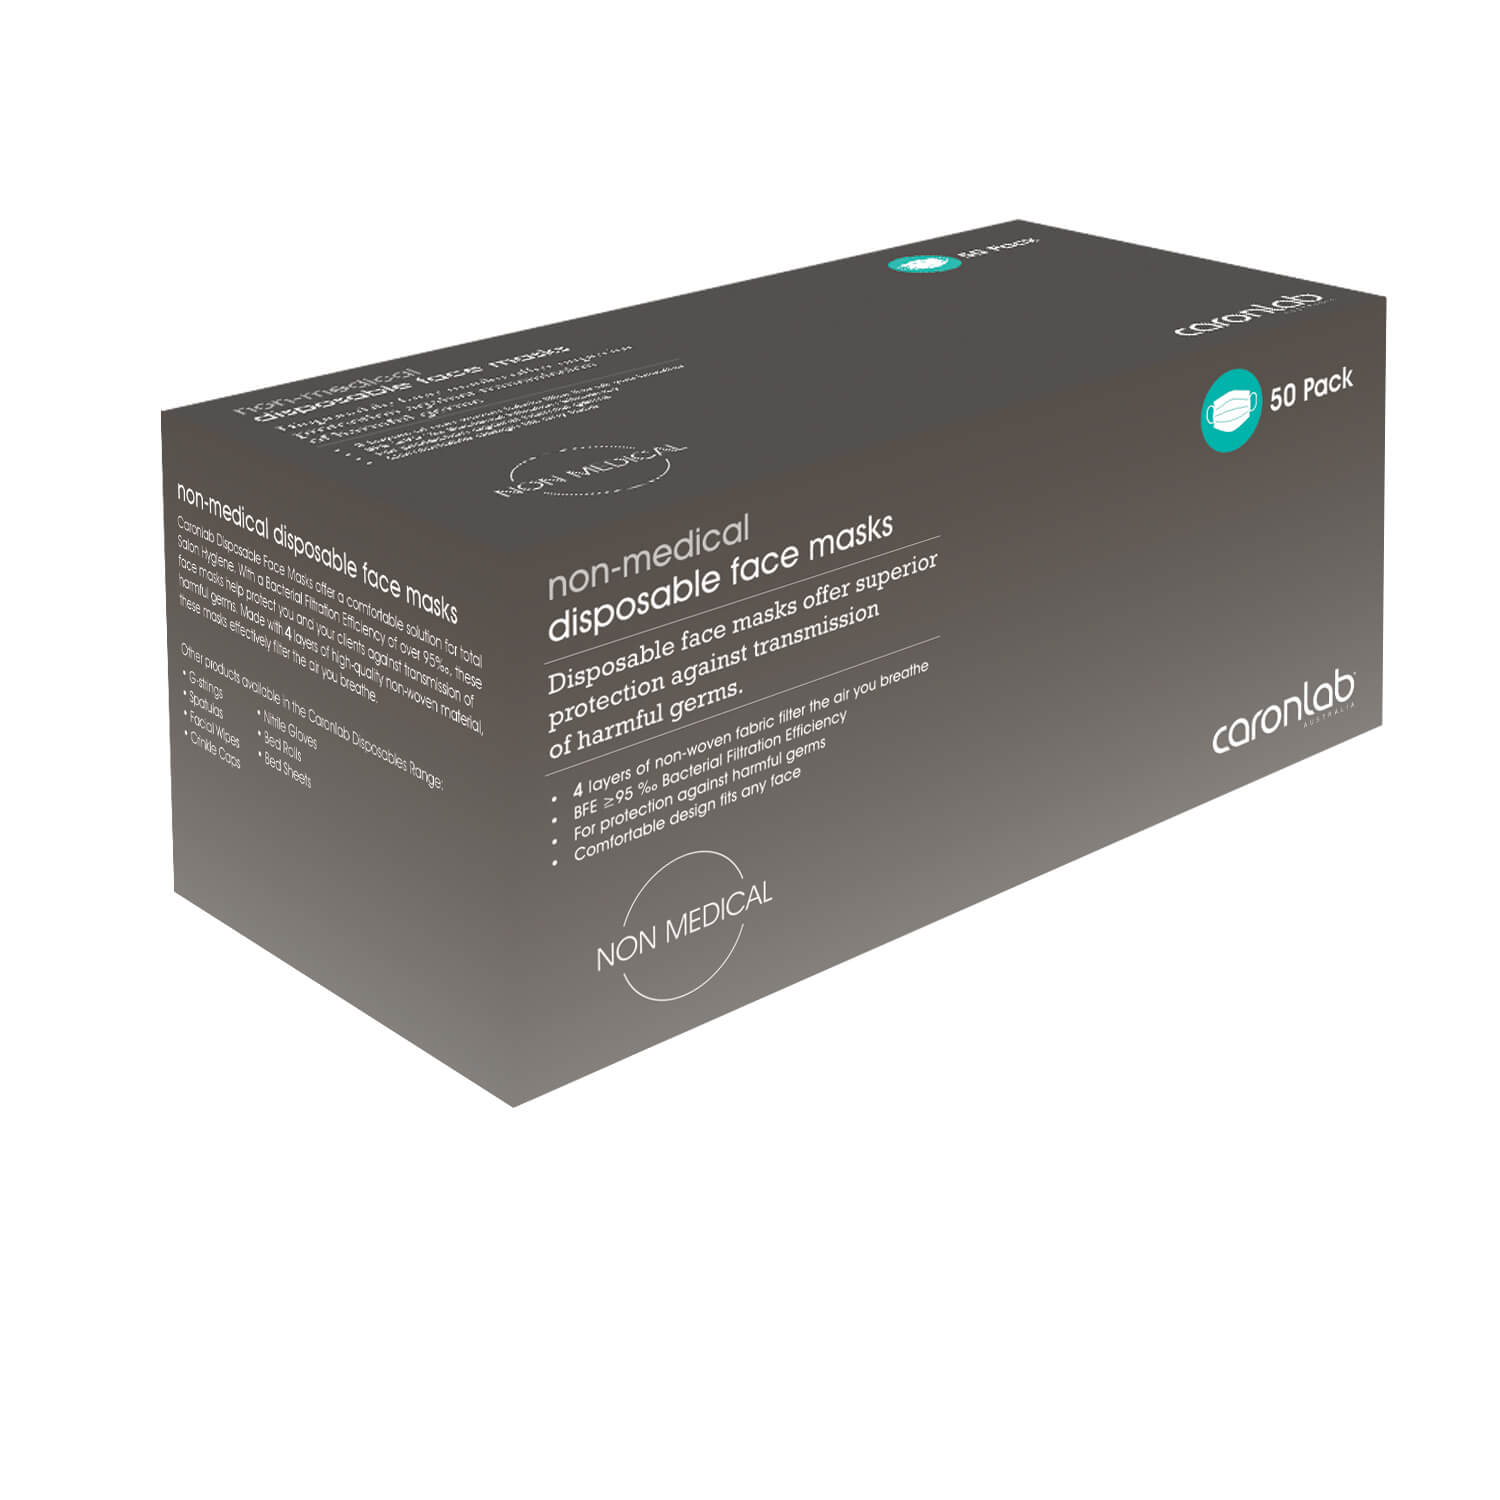 Caronlab - Disposable Face Mask 3PLY (50 pack)